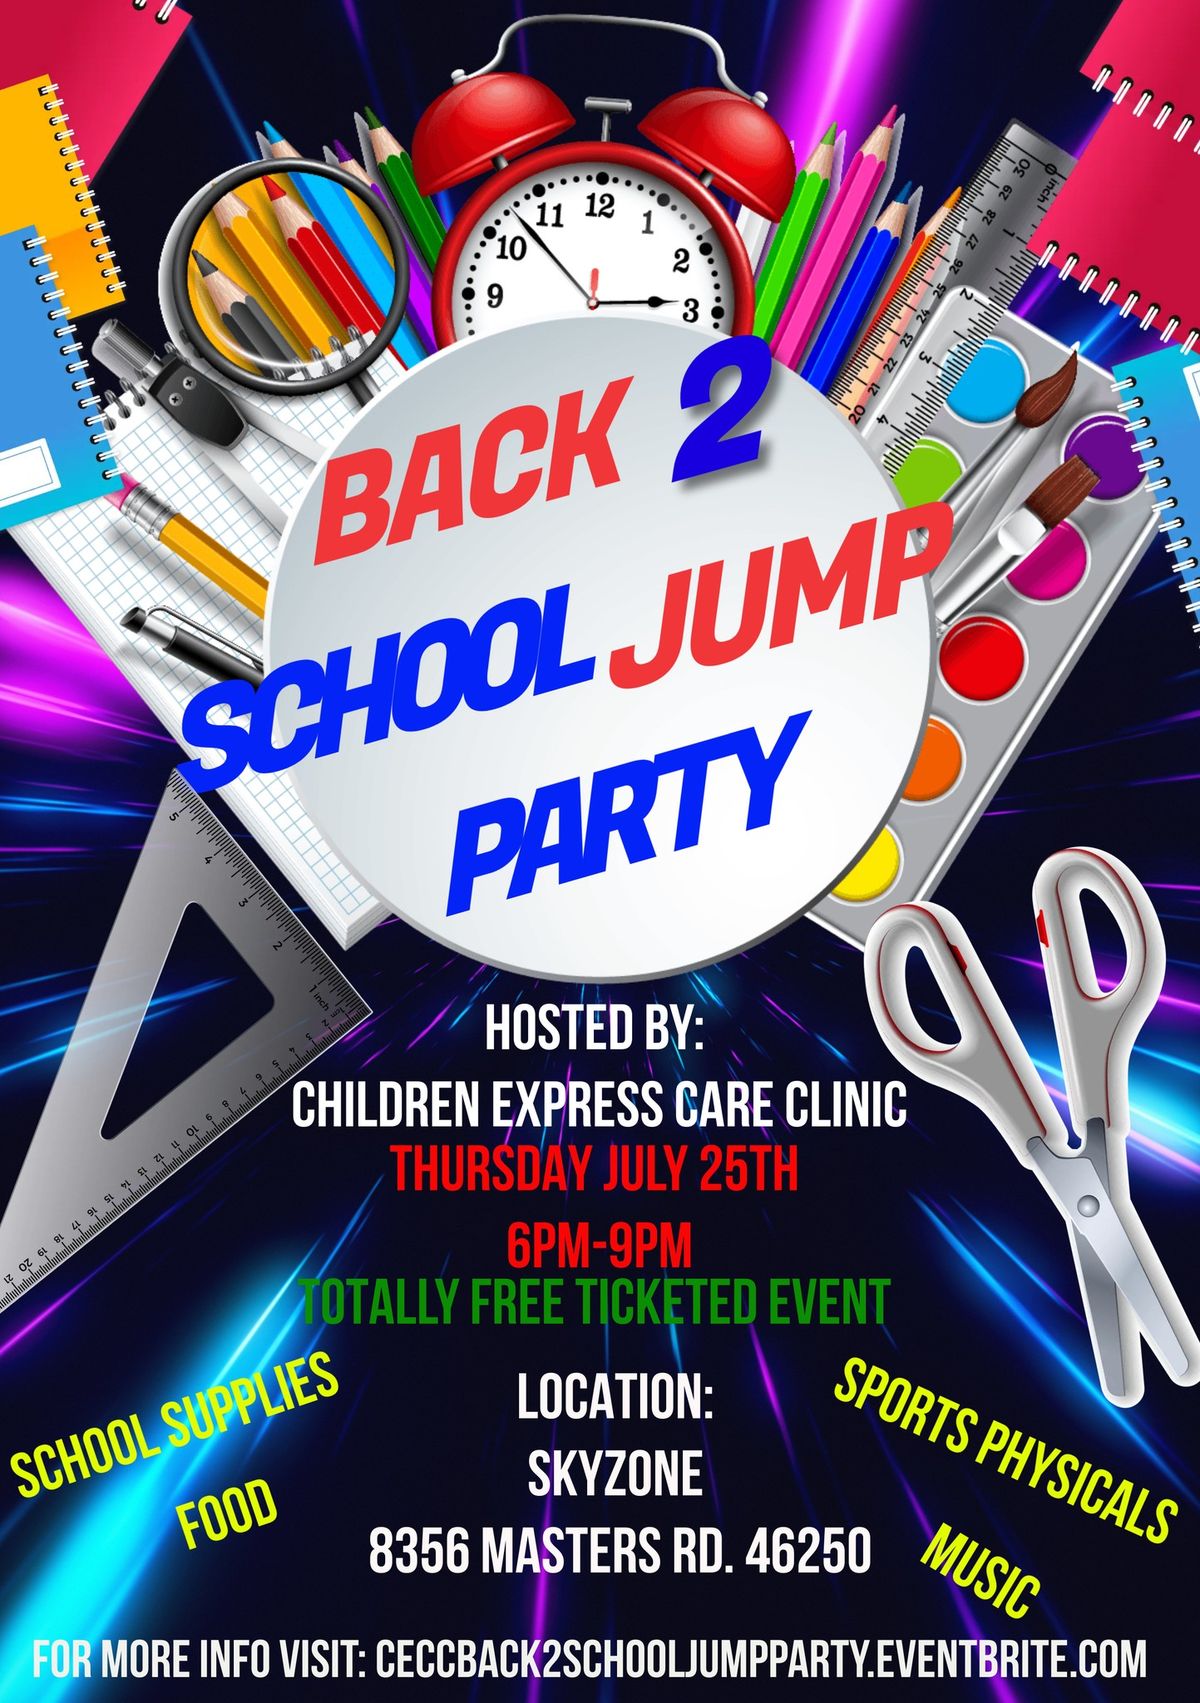 Children Express Care Clinic Back 2 School Jump Party 